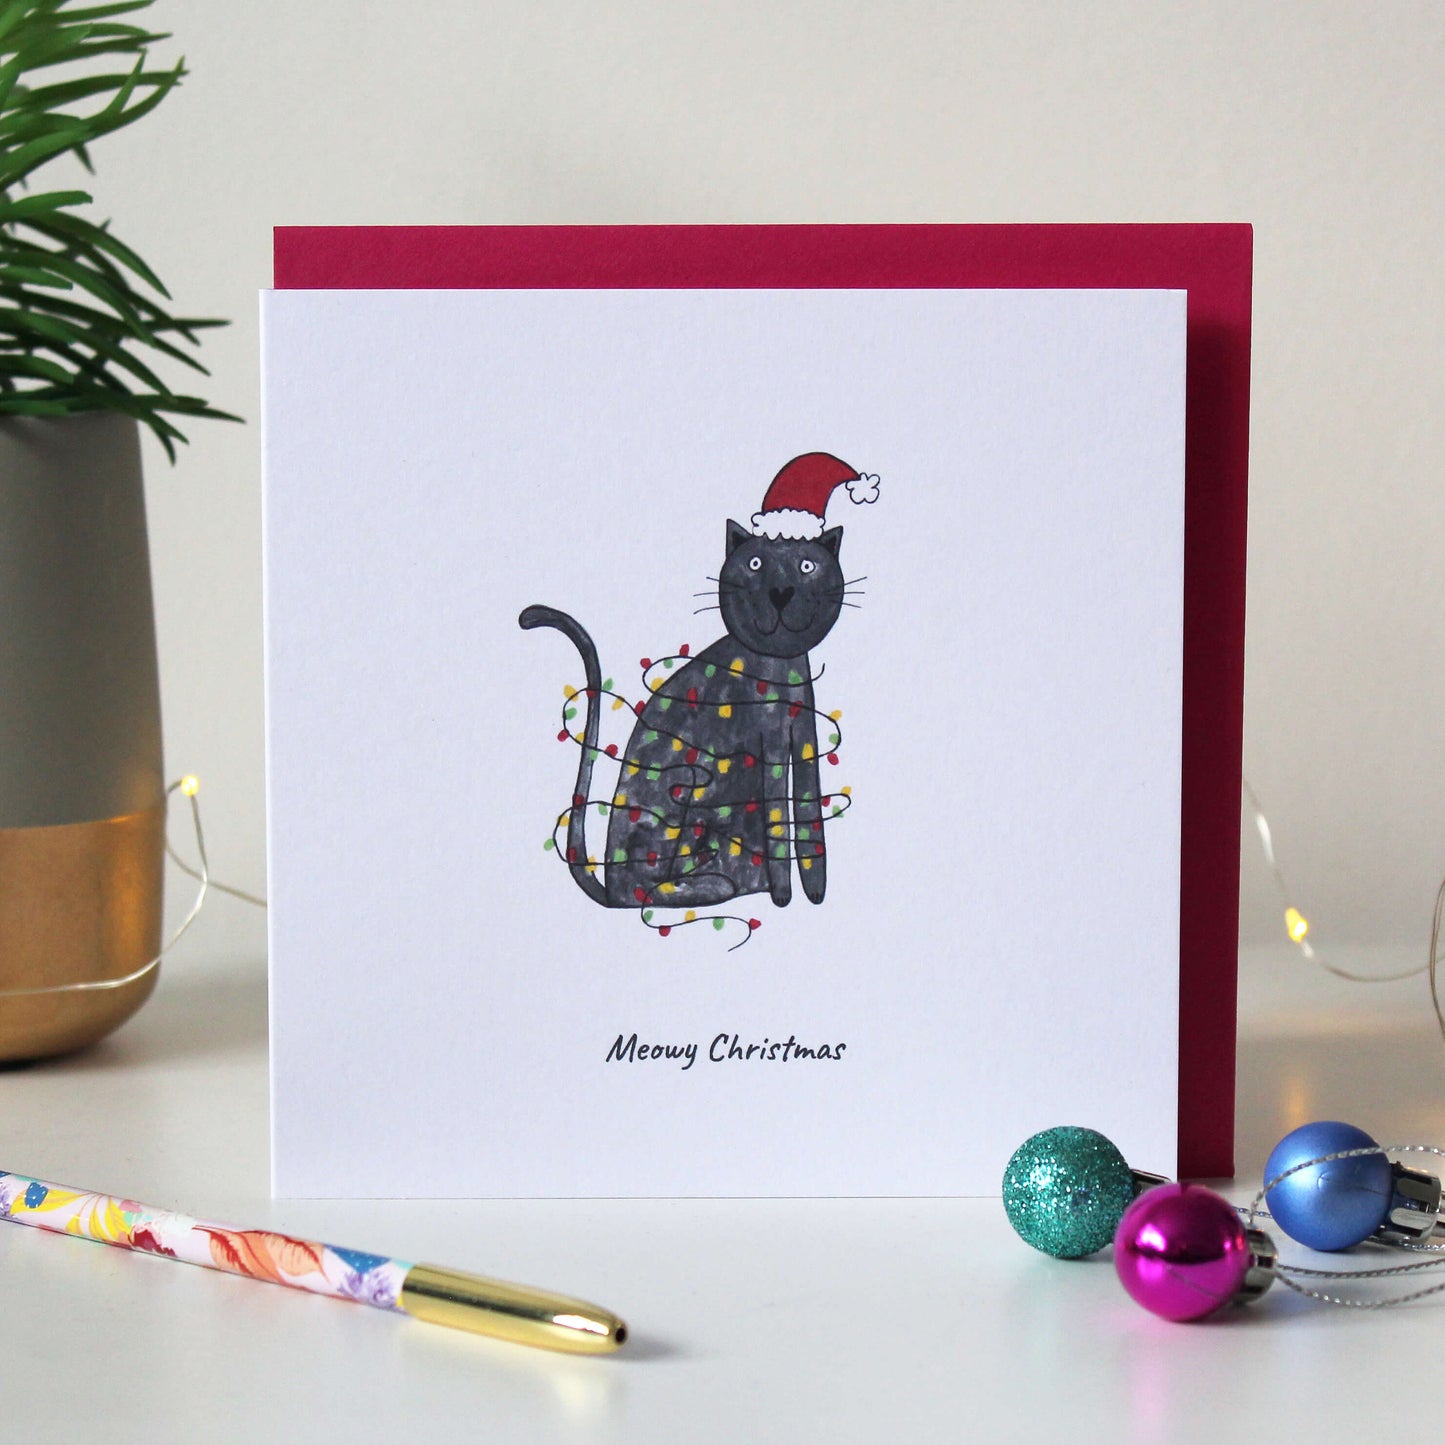 Have a 'Meowy Christmas' funny cat Christmas card